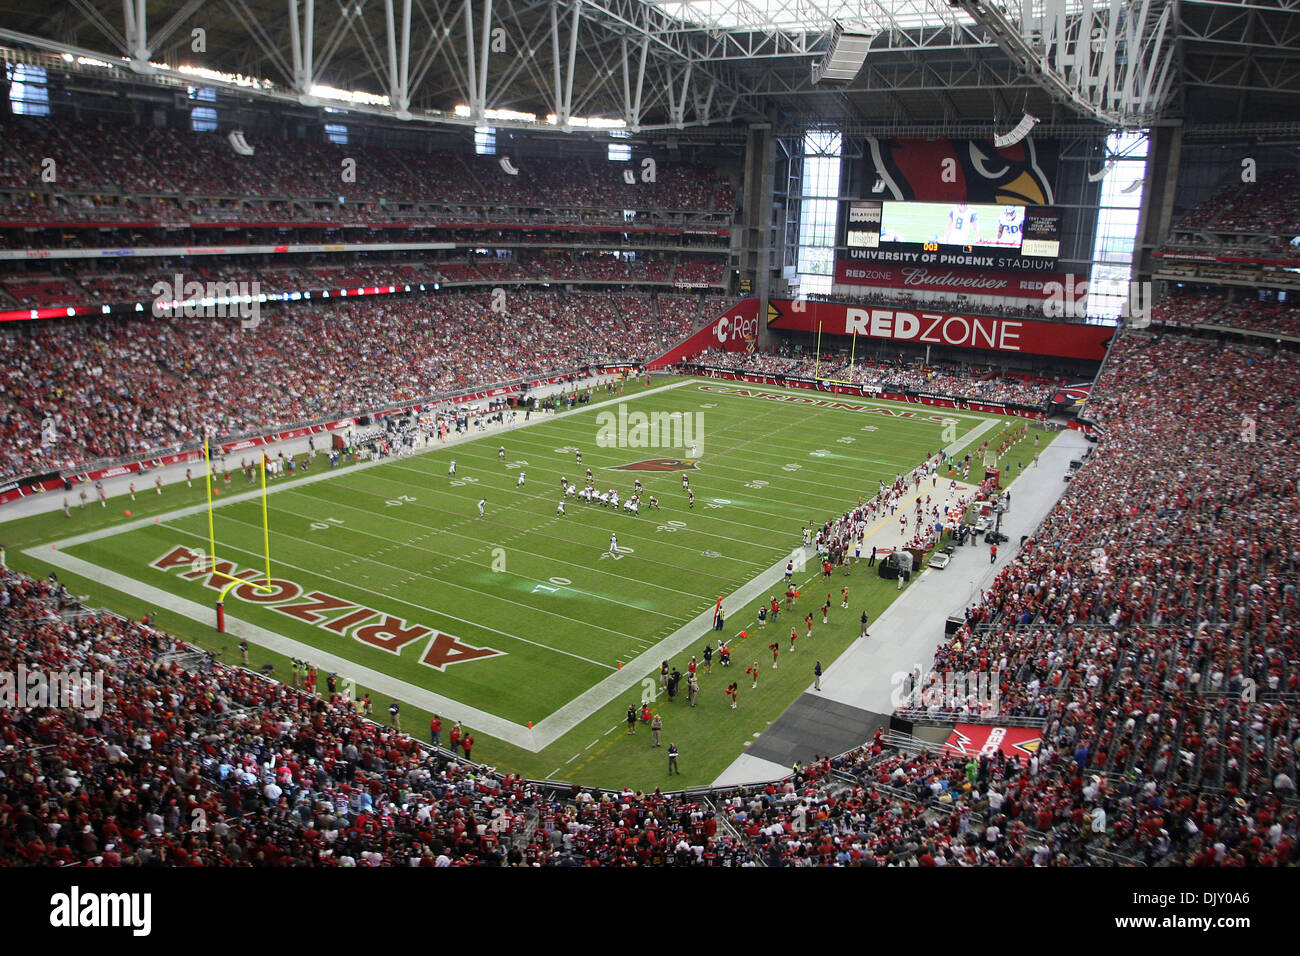 Nov. 15, 2010 - Glendale, Arizona, United States of America - In a NFC West division battle, the Arizona Cardinals take on the Seattle Seahawks at University of Phoenix Stadium in Glendale, Arizona.  The Seahawks defeated the Cardinals 36-18. (Credit Image: © Gene Lower/Southcreek Global/ZUMApress.com) Stock Photo